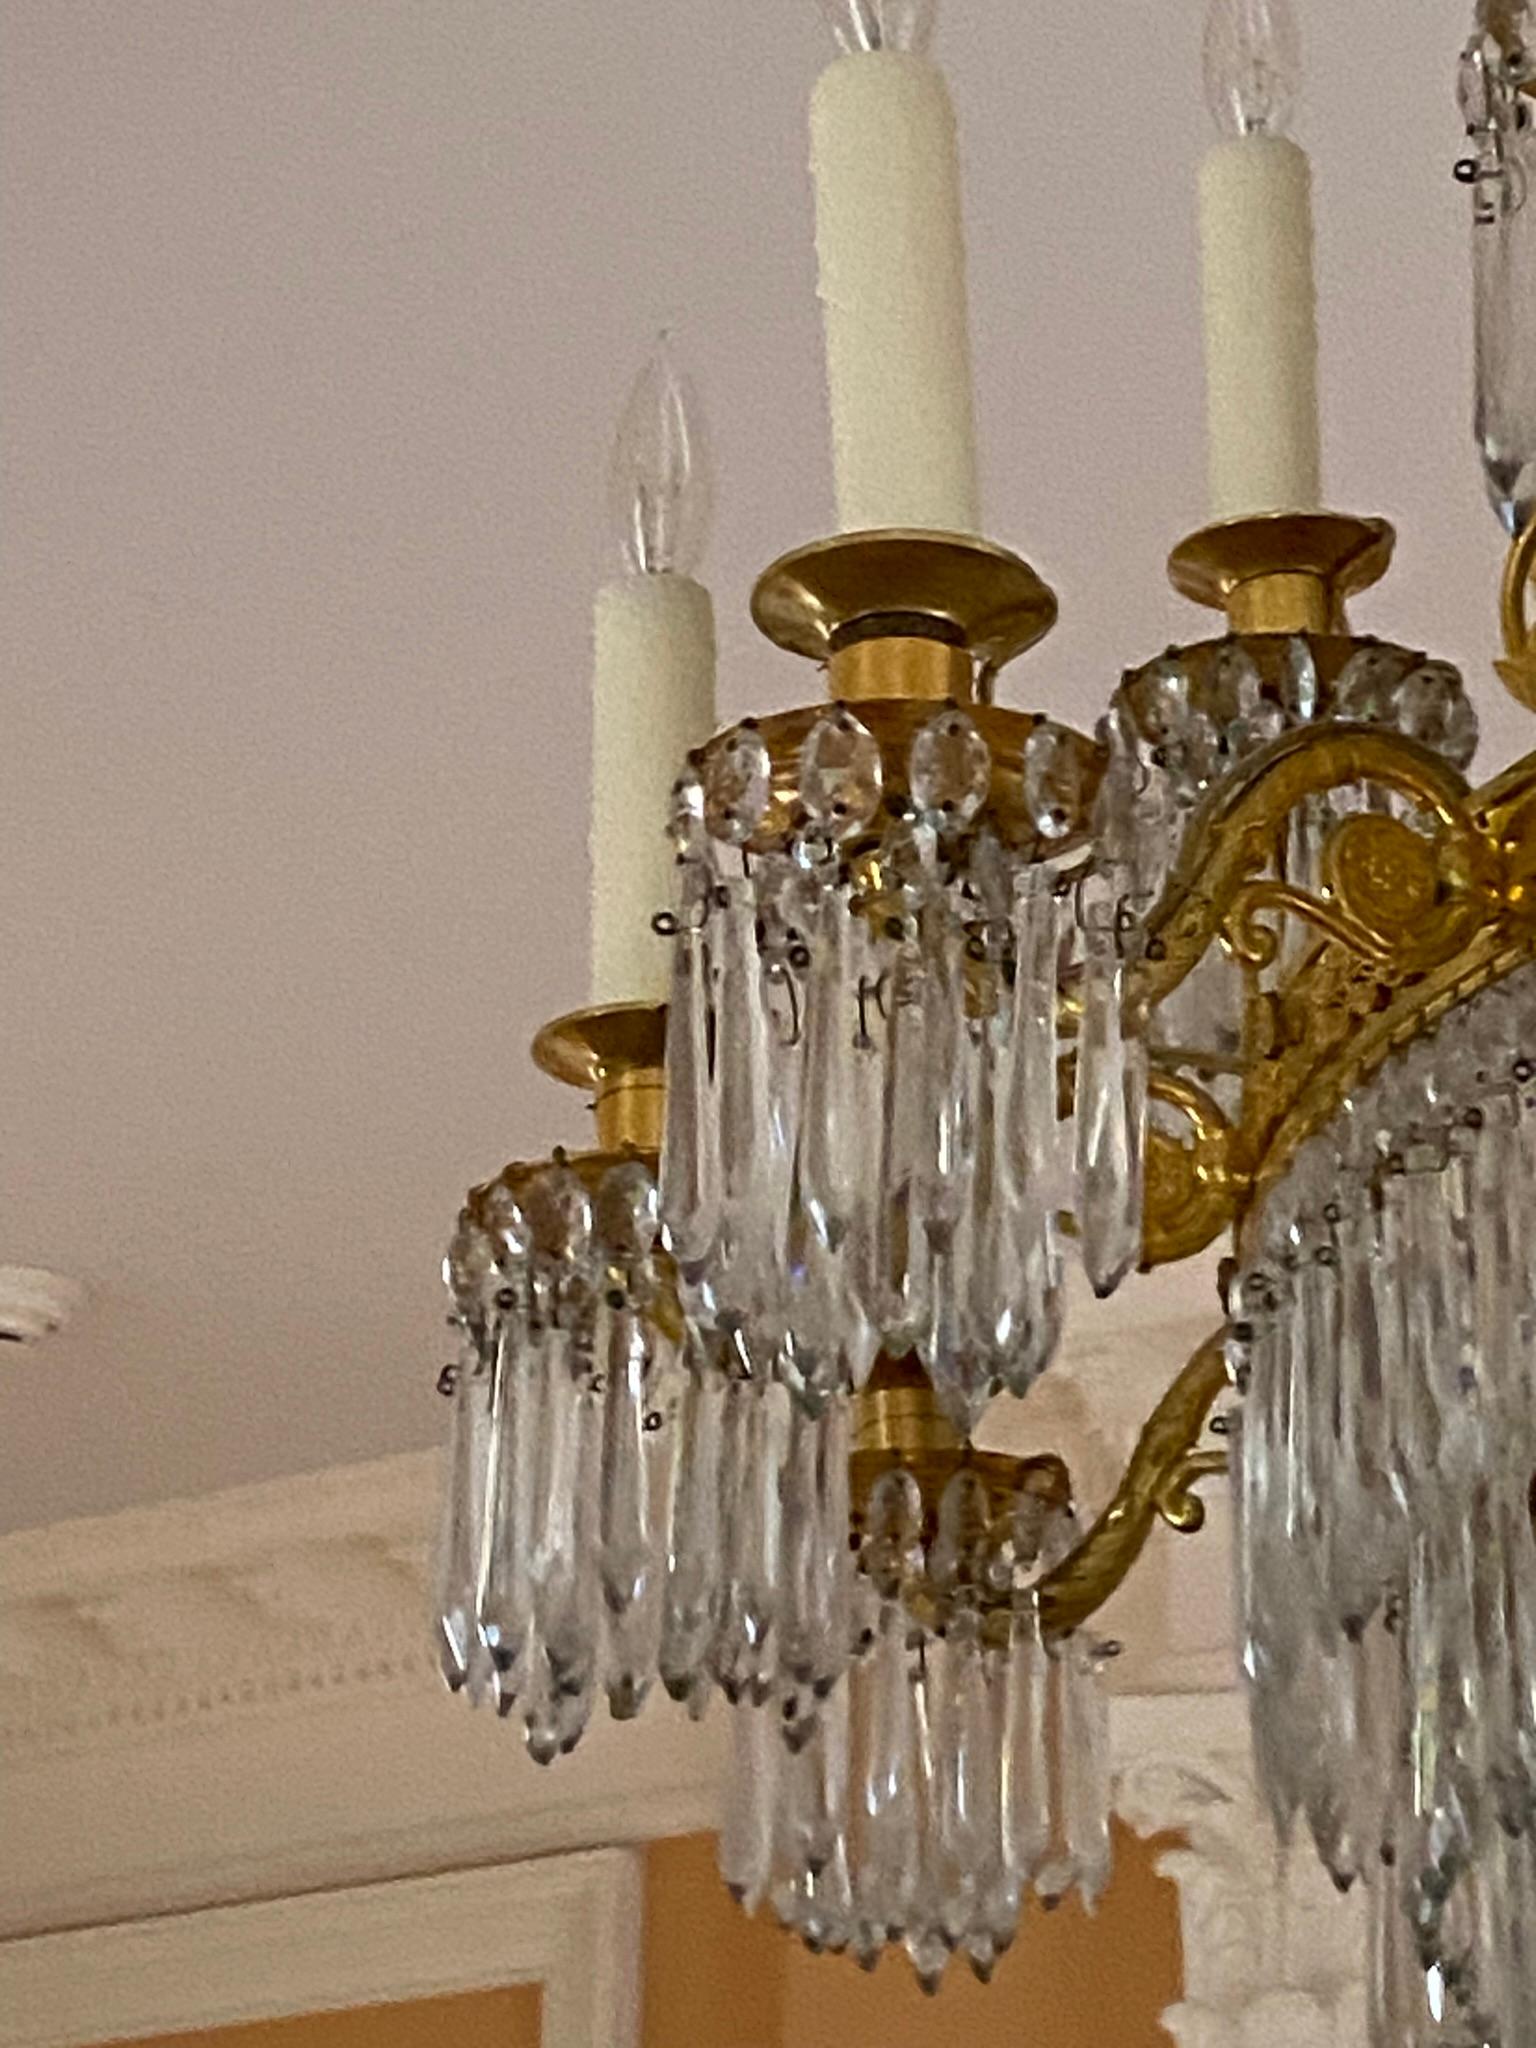 Antique French Empire style gilded bronze chandelier with 18 lights. This has been newly restored and rewired and is ready to ship. This was retrieved from an estate located in Greenwich, Connecticut. Good condition with appropriate wear from age.